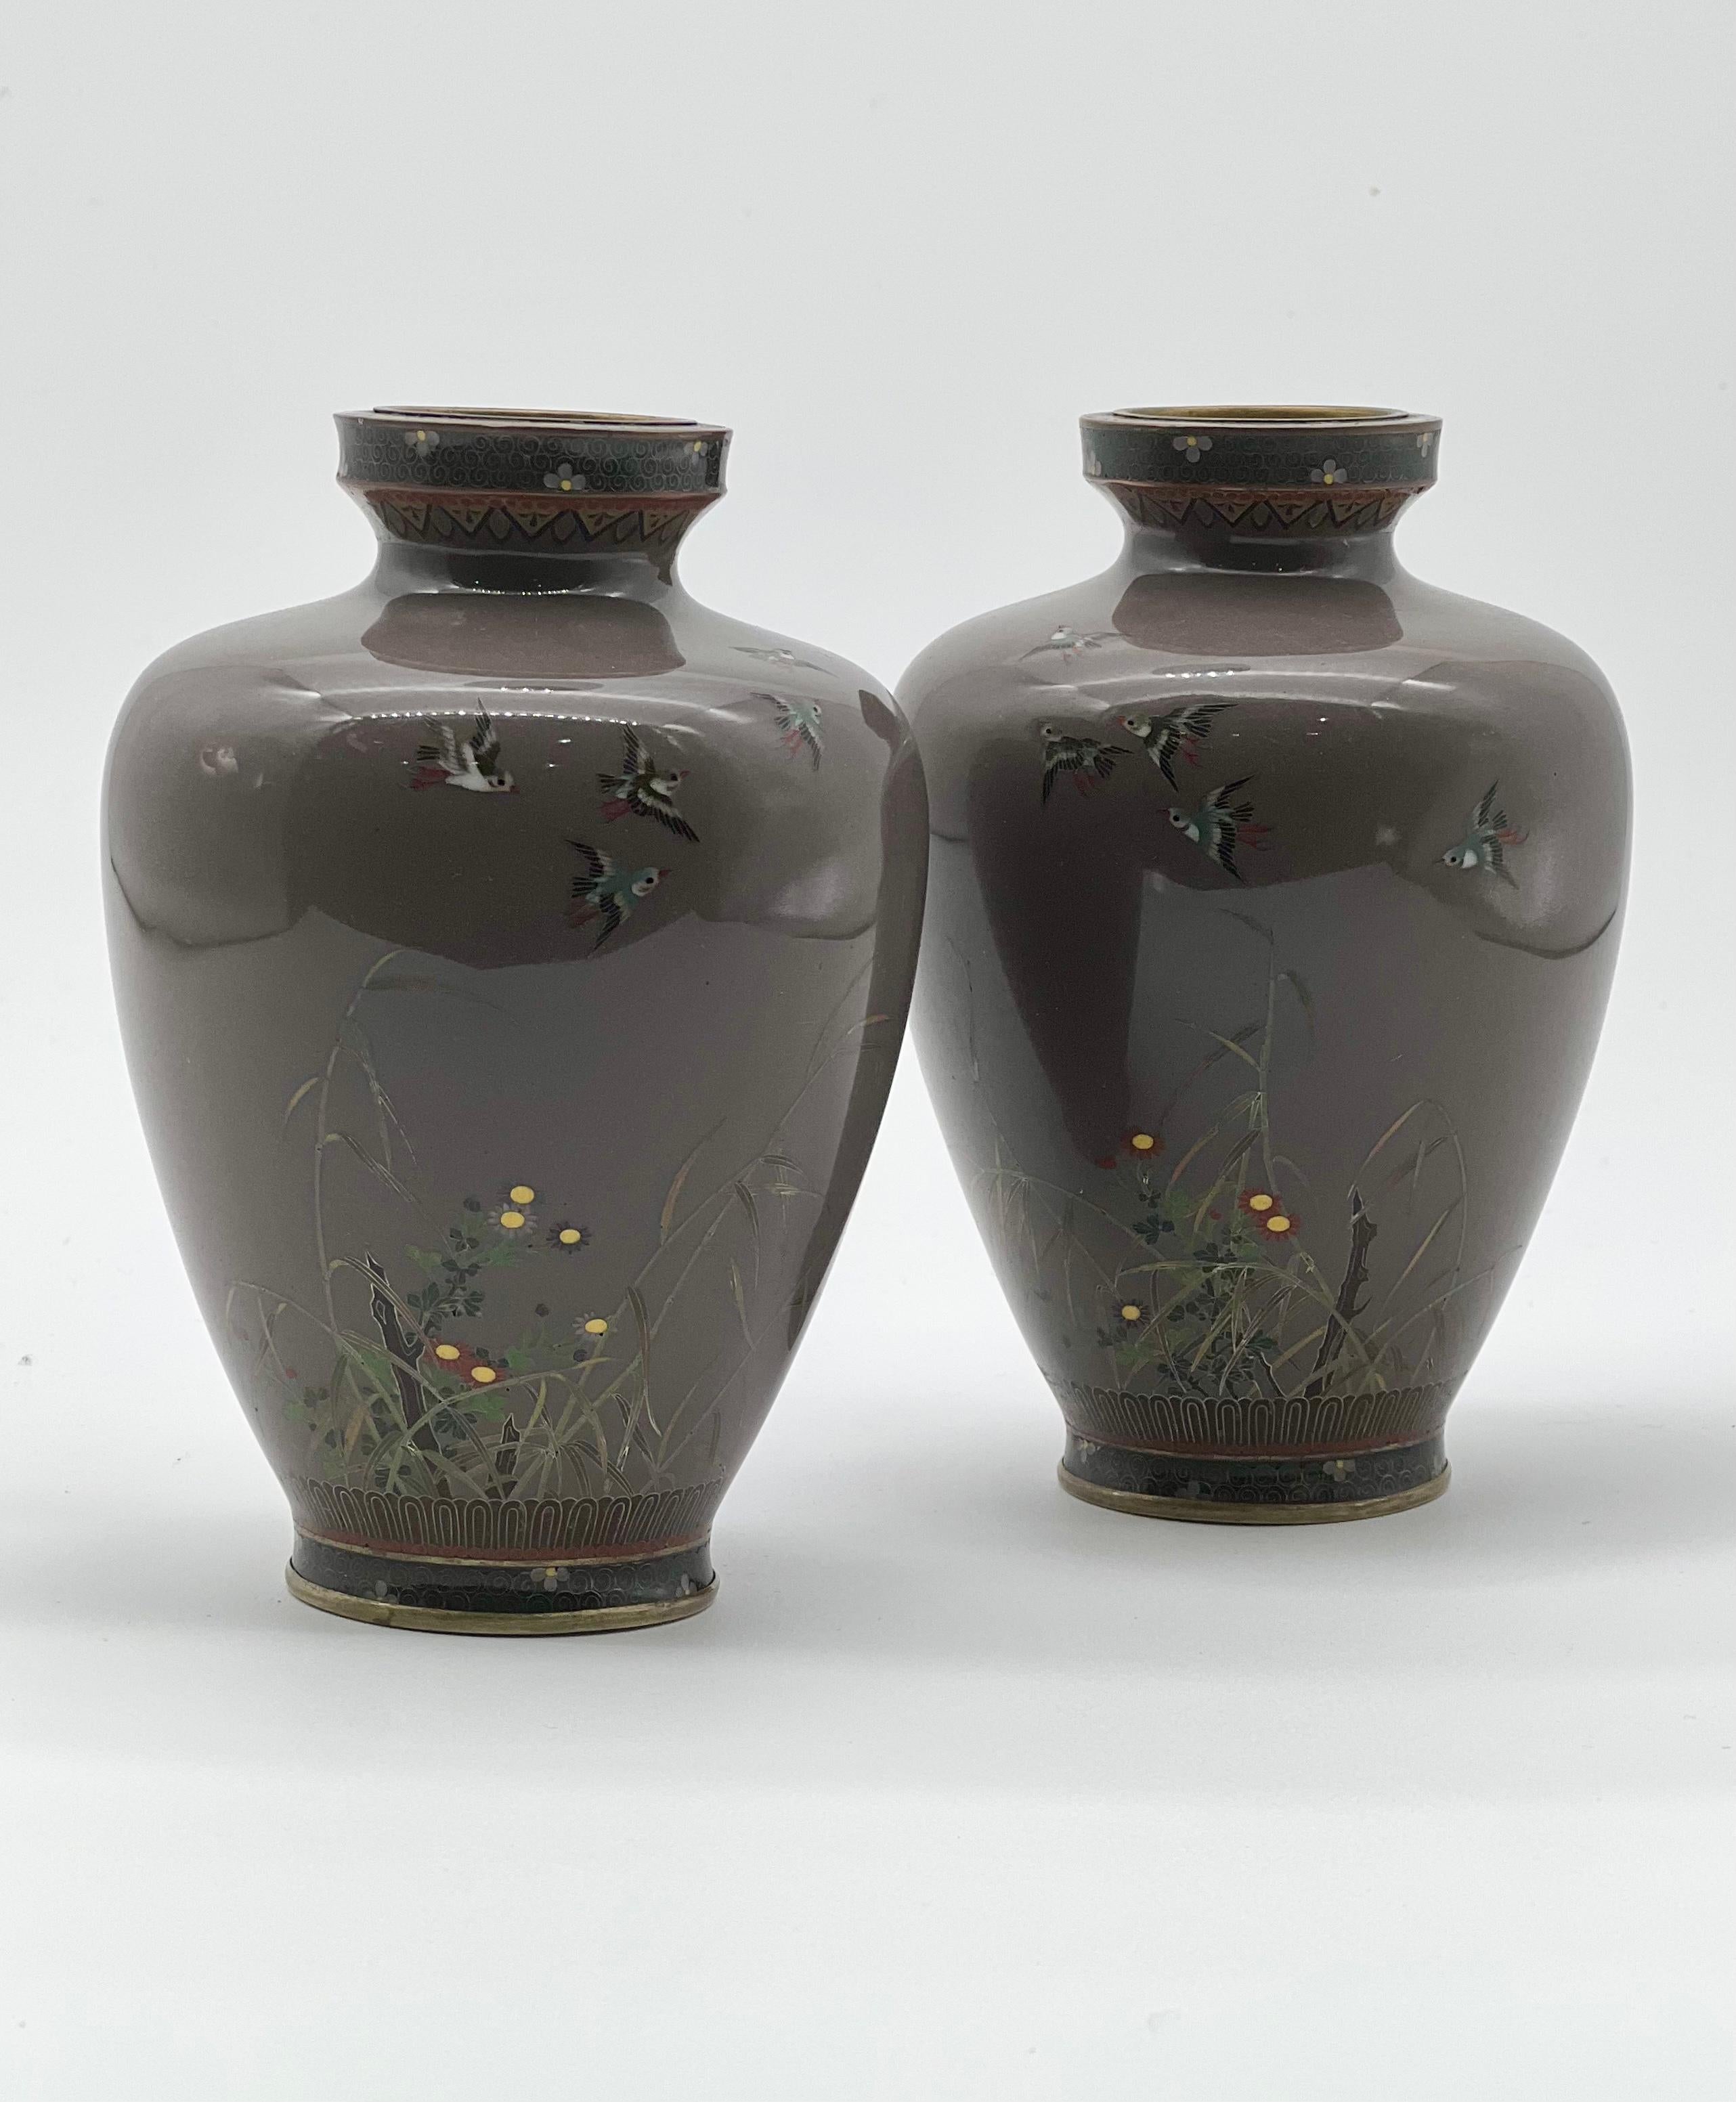 A Fine Pair of Japanese Cloisonne Enamel Vases Attributed to Hayashi Kodenji For Sale 12